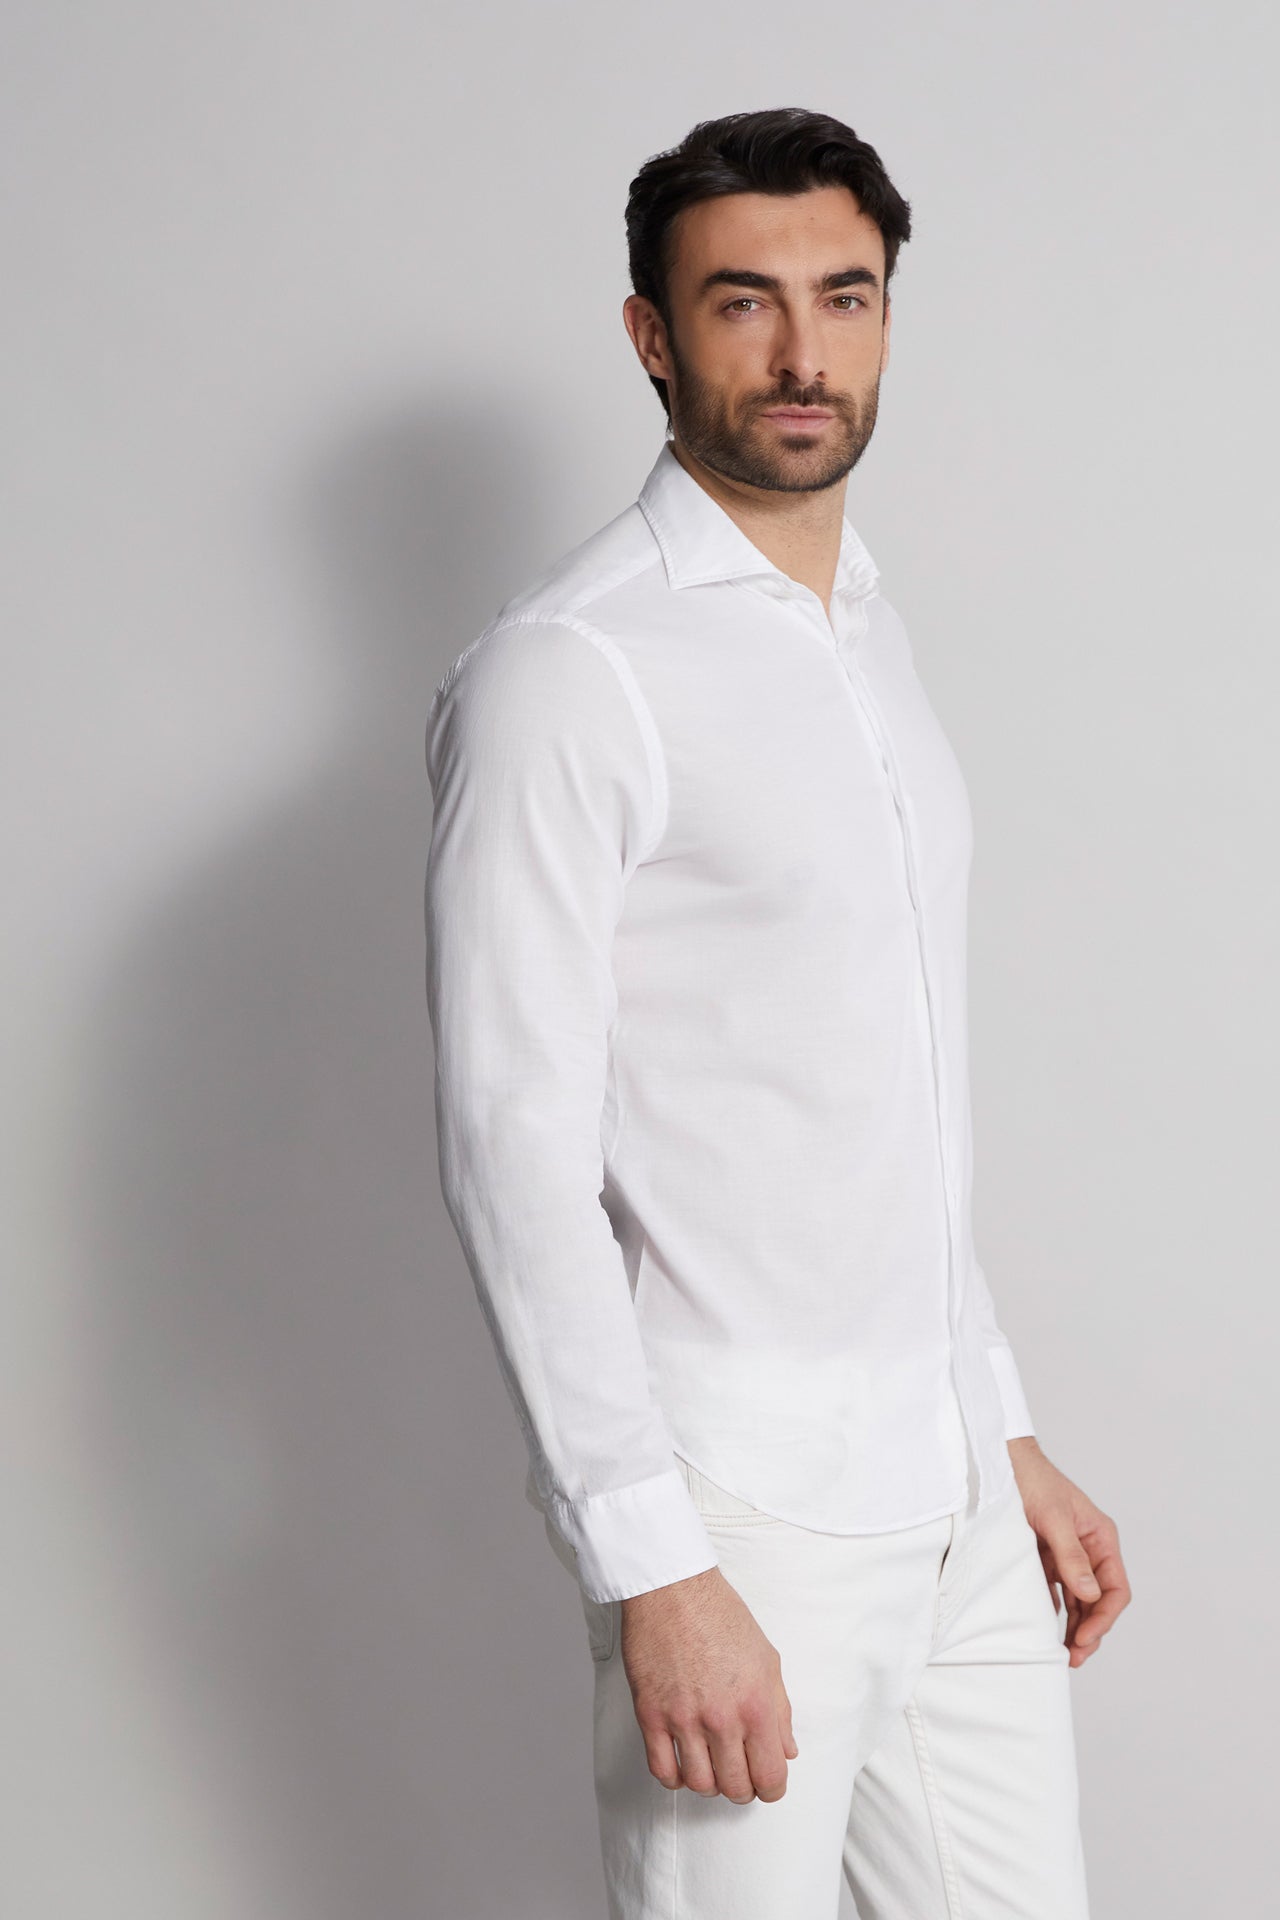 Our Sean stretch cotton voile shirt in iconic colors